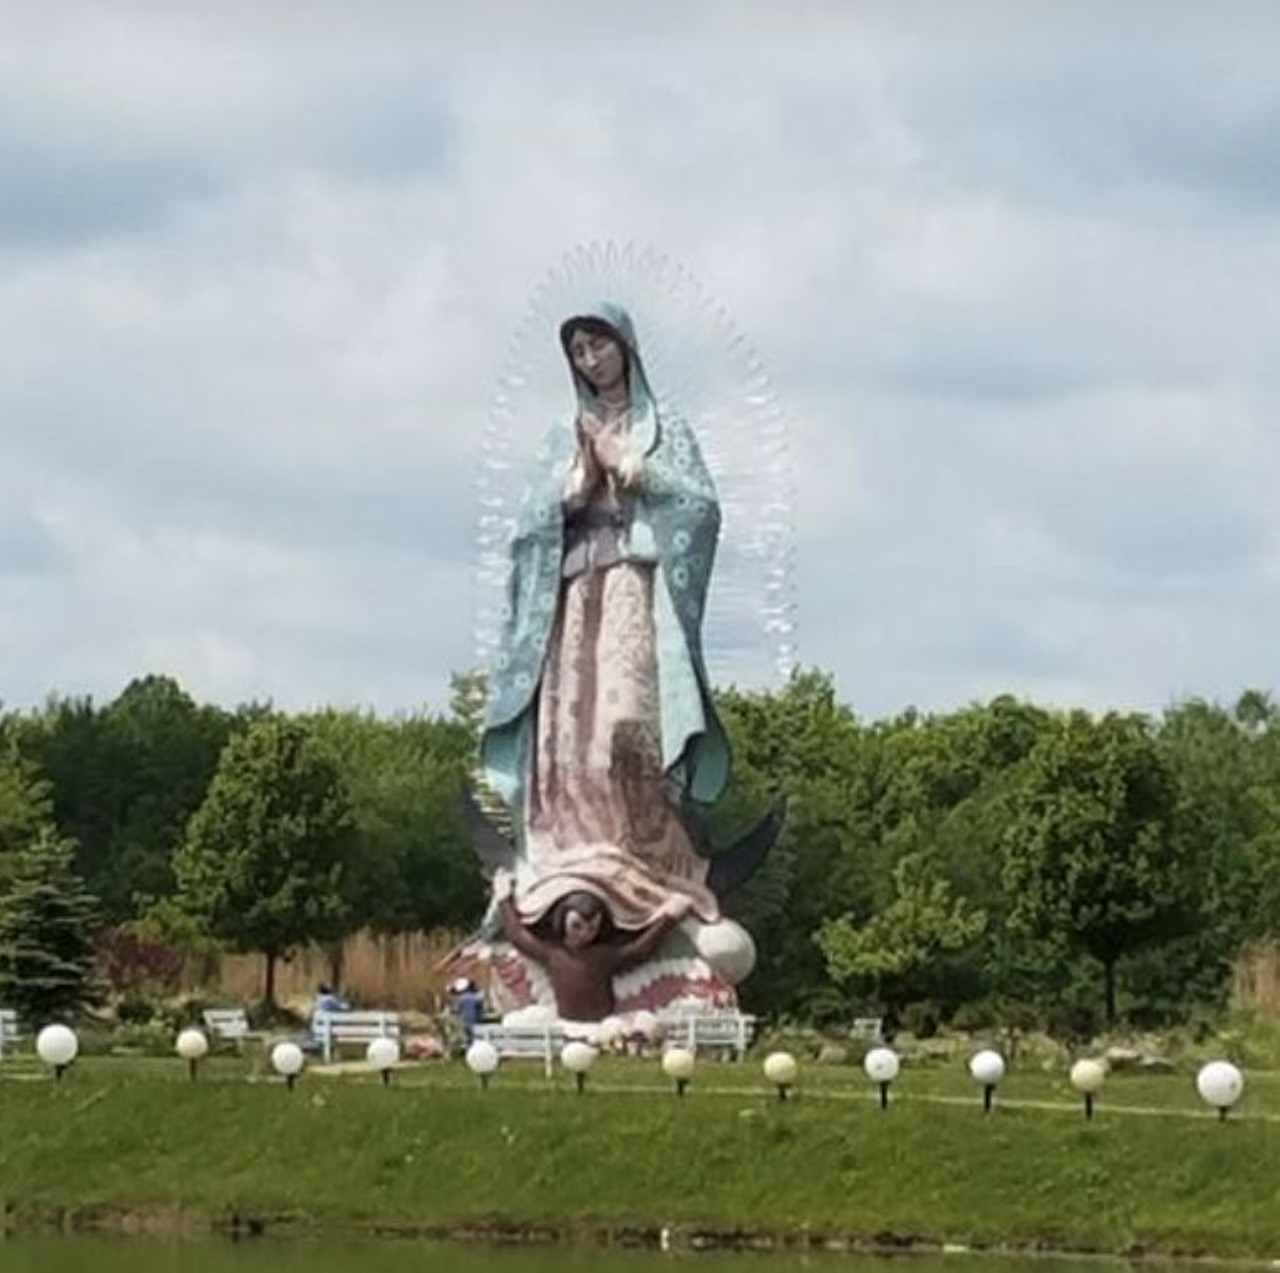  World&#146;s Tallest Our Lady of Guadalupe Statue
6601 Ireland Rd., Windsor
Located in Windsor, around 50 miles east of downtown, just before you get to Pennsylvania, stands this religious statue, measuring 33-feet tall. 
Photo via Windsor,Ohio/Facebook